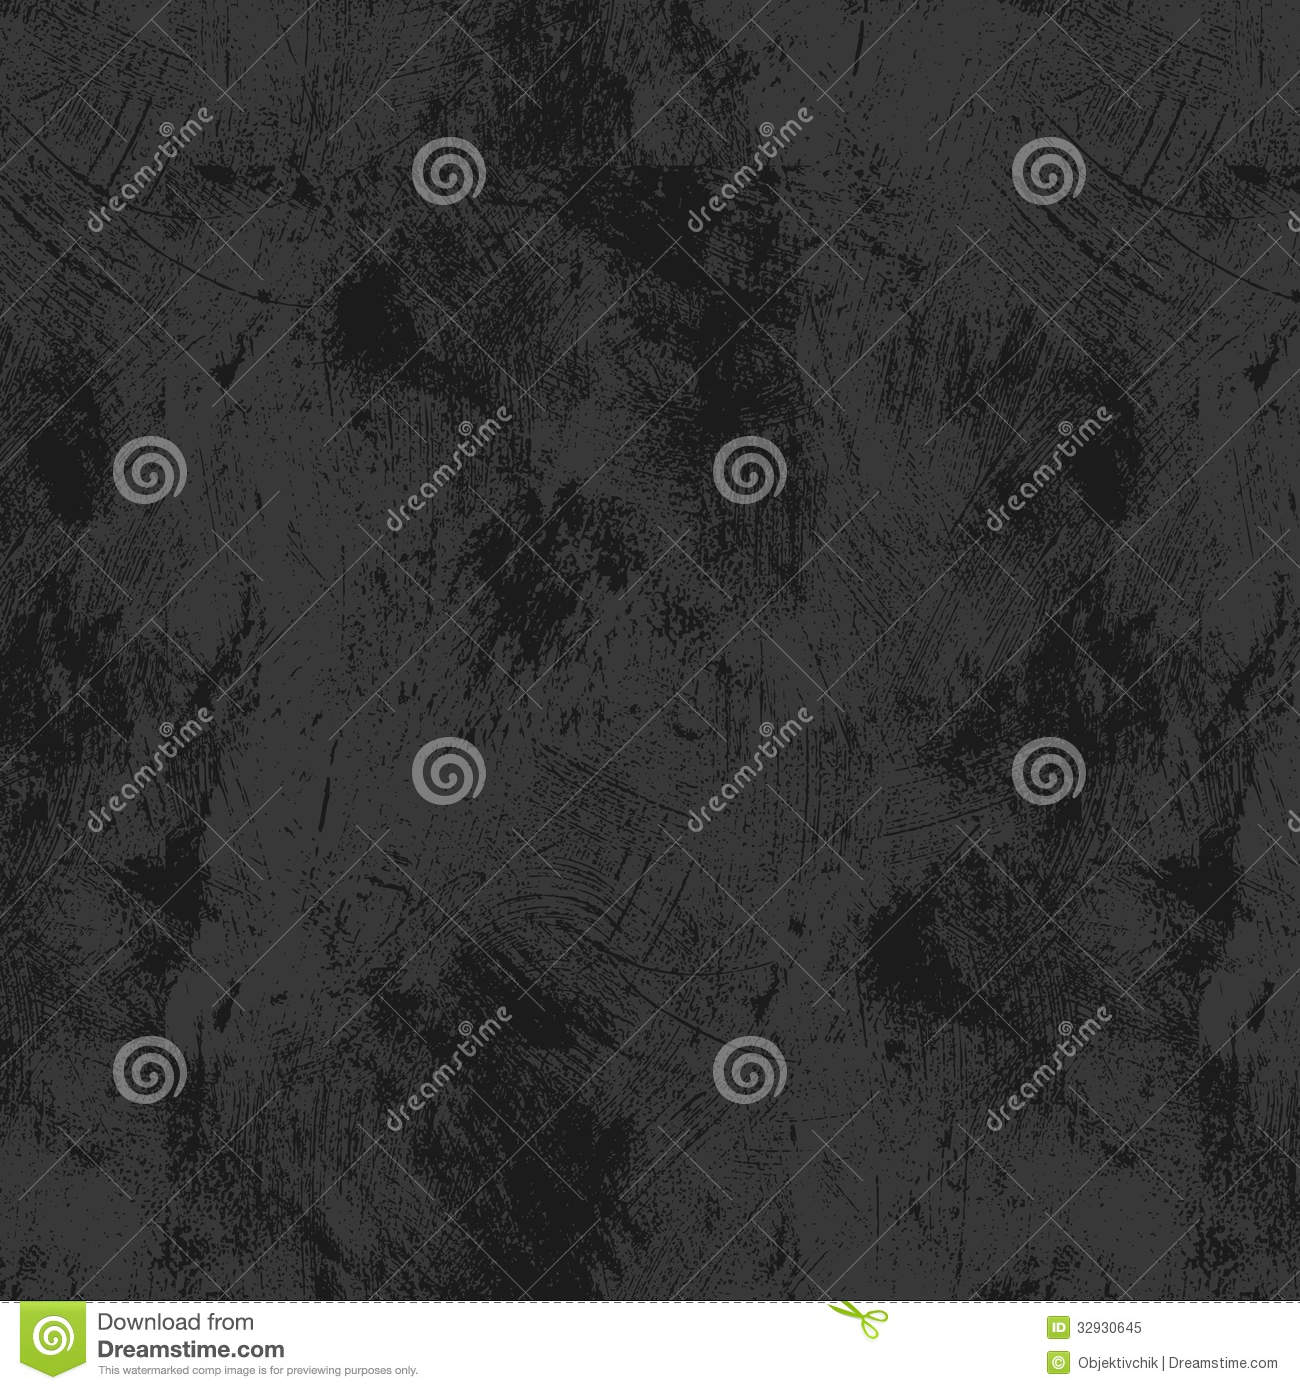 Black Abstract Grunge